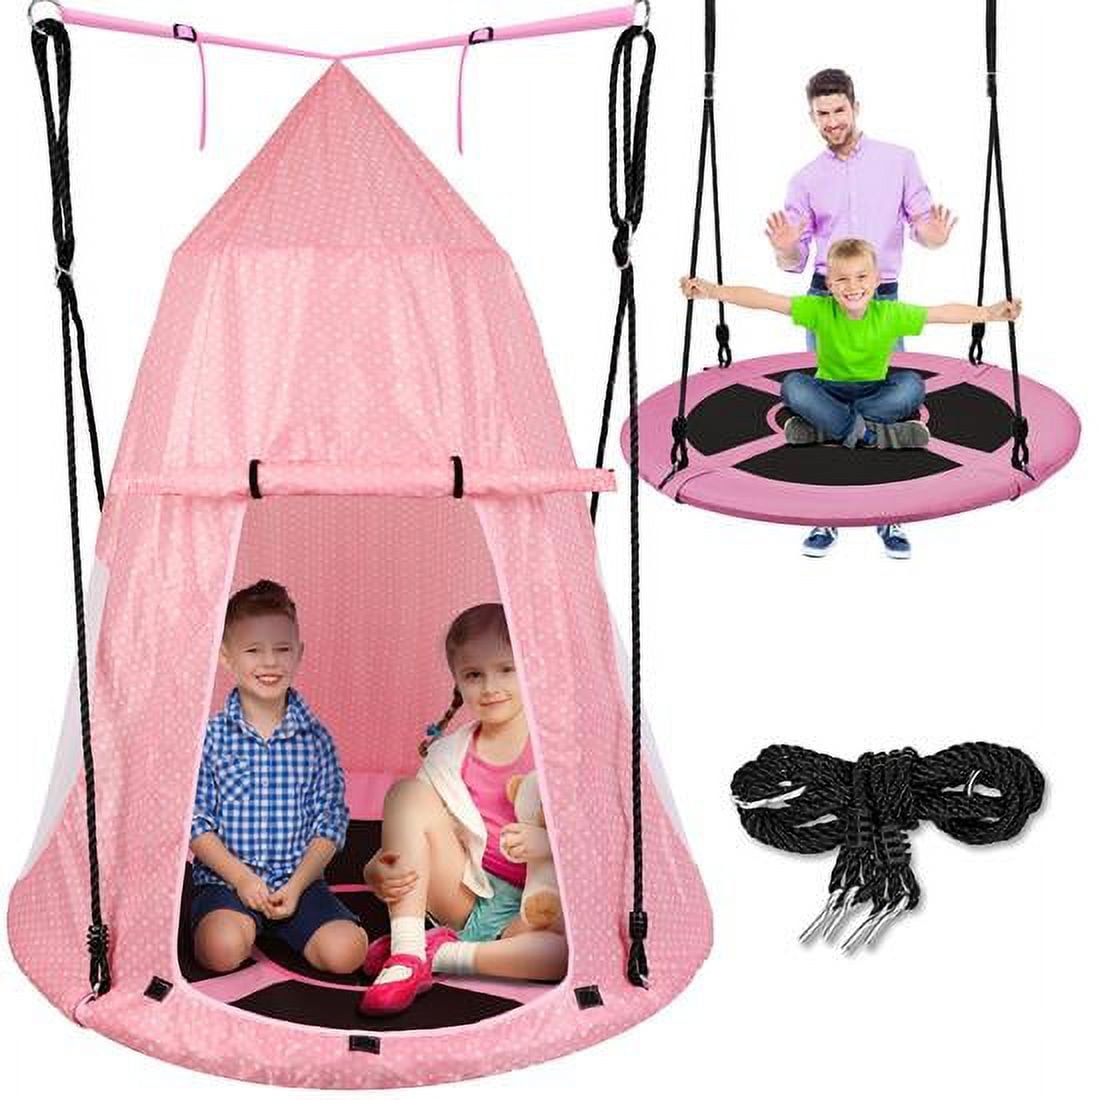 Serenelife 40 Hanging Tree Play Tent Hangout for Kids Indoor Outdoor Flying Saucer Floating Platform Swing Treepod Inside Outside House Canopy